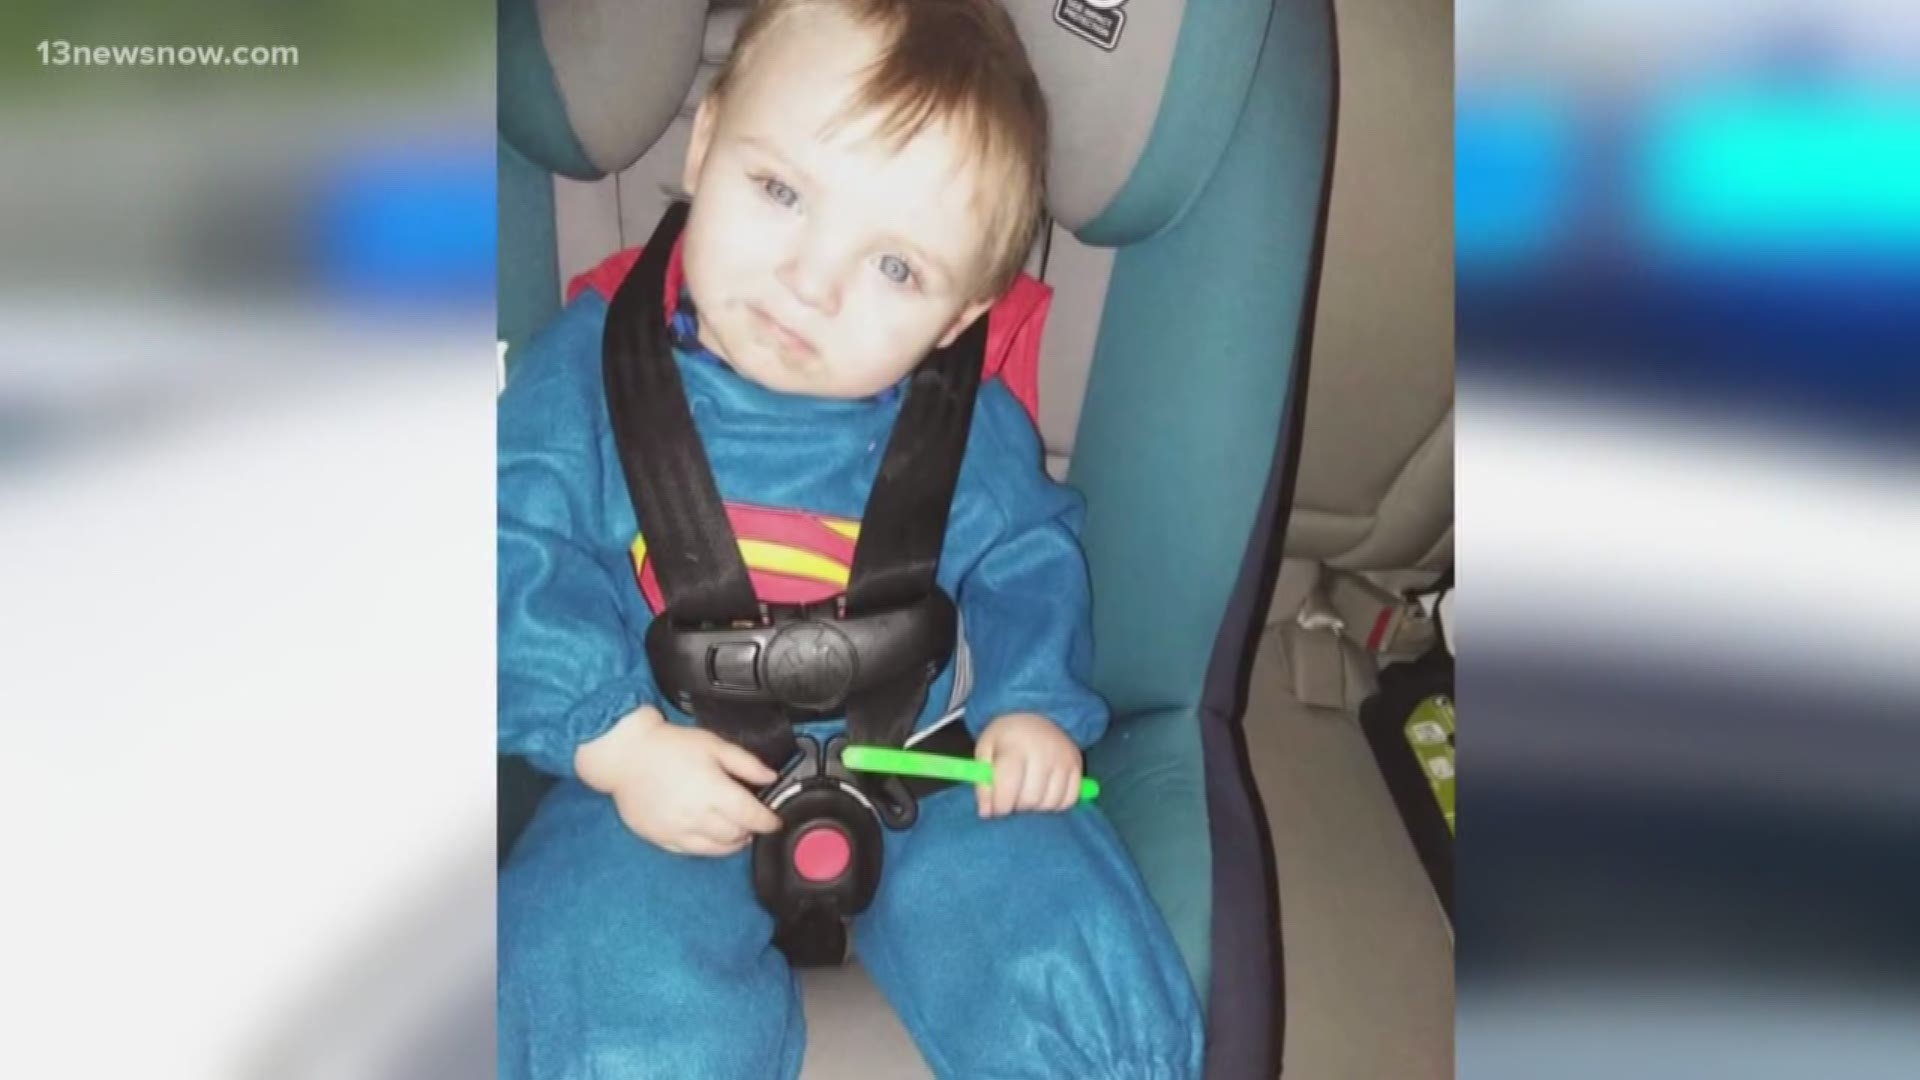 Noah Tomlin was last seen by his mother when she put him to bed at 1 a.m. Monday. Police are considering every possibility of what happened to the two-year-old.